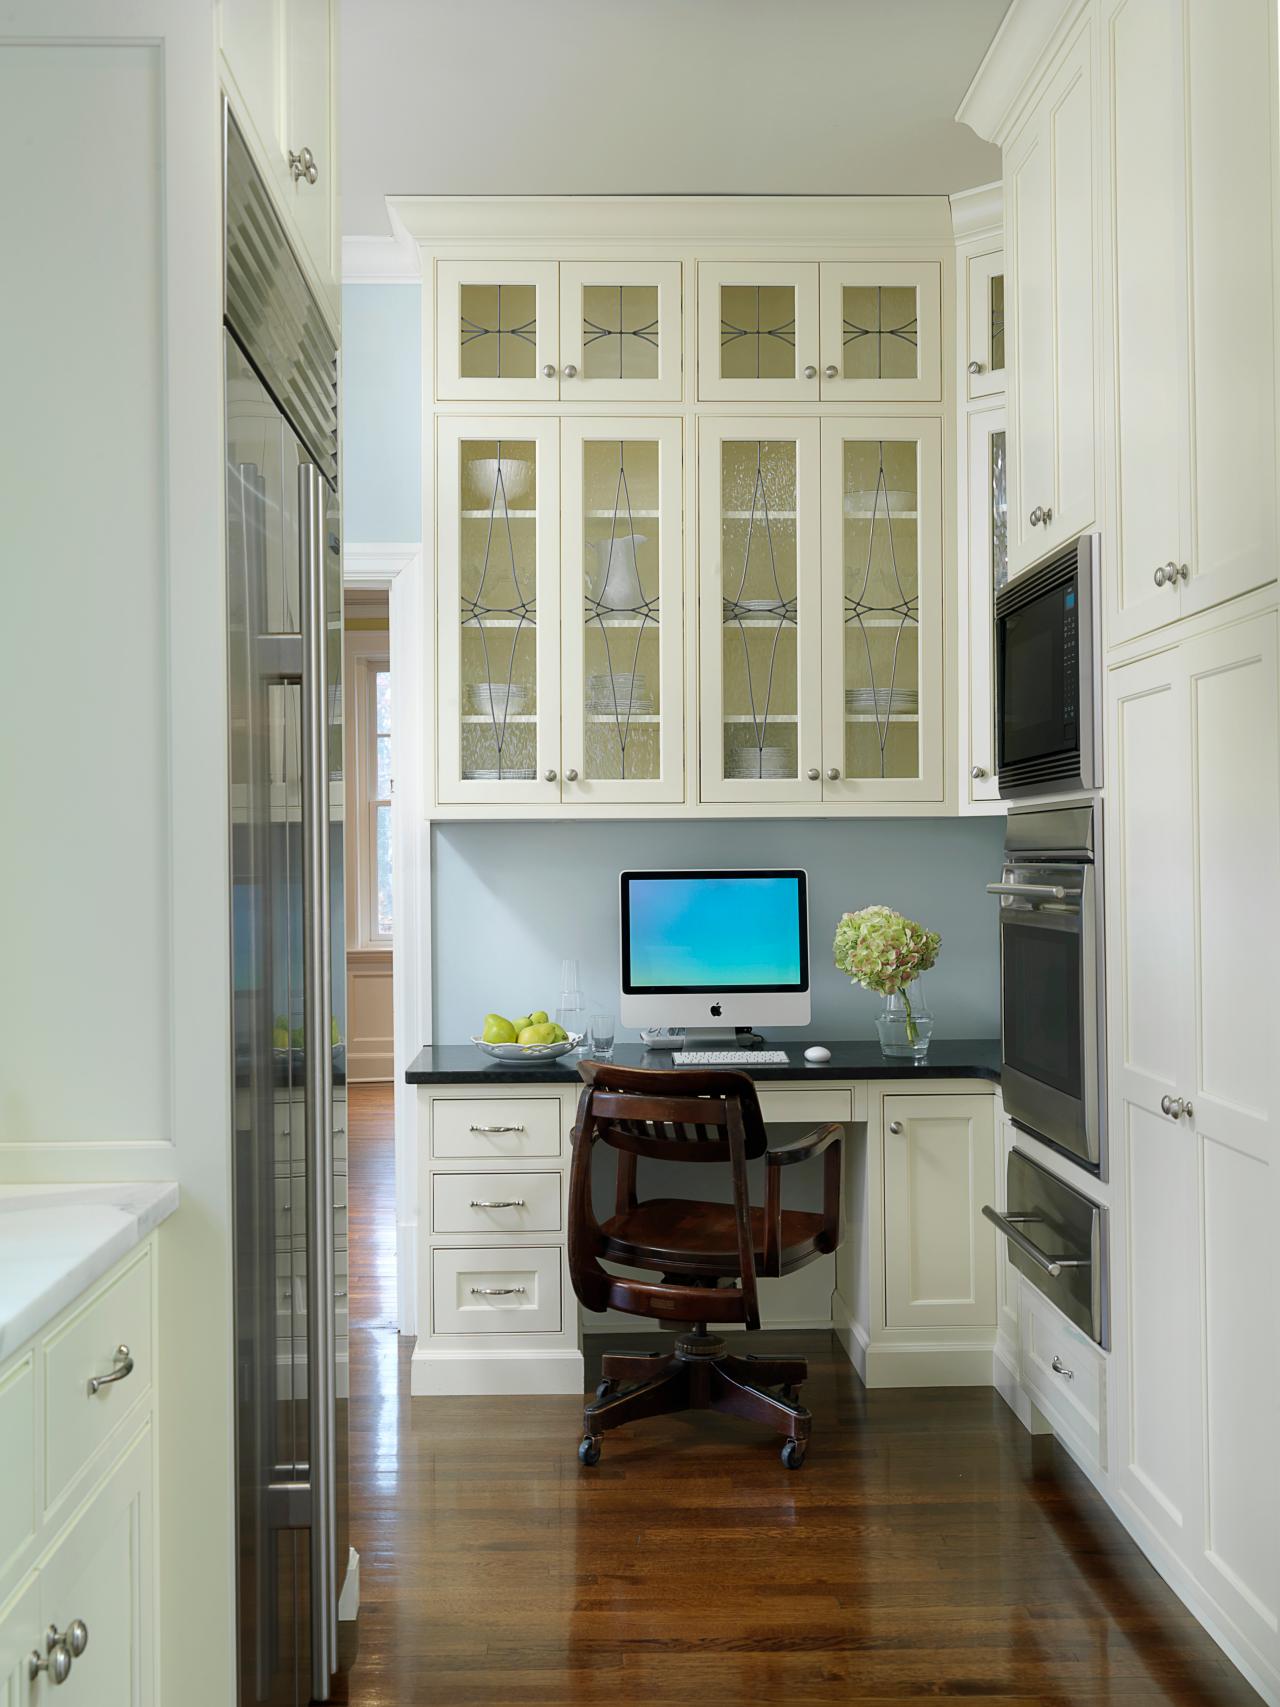 Traditional Kitchen Office Space With White Cabinets HGTV